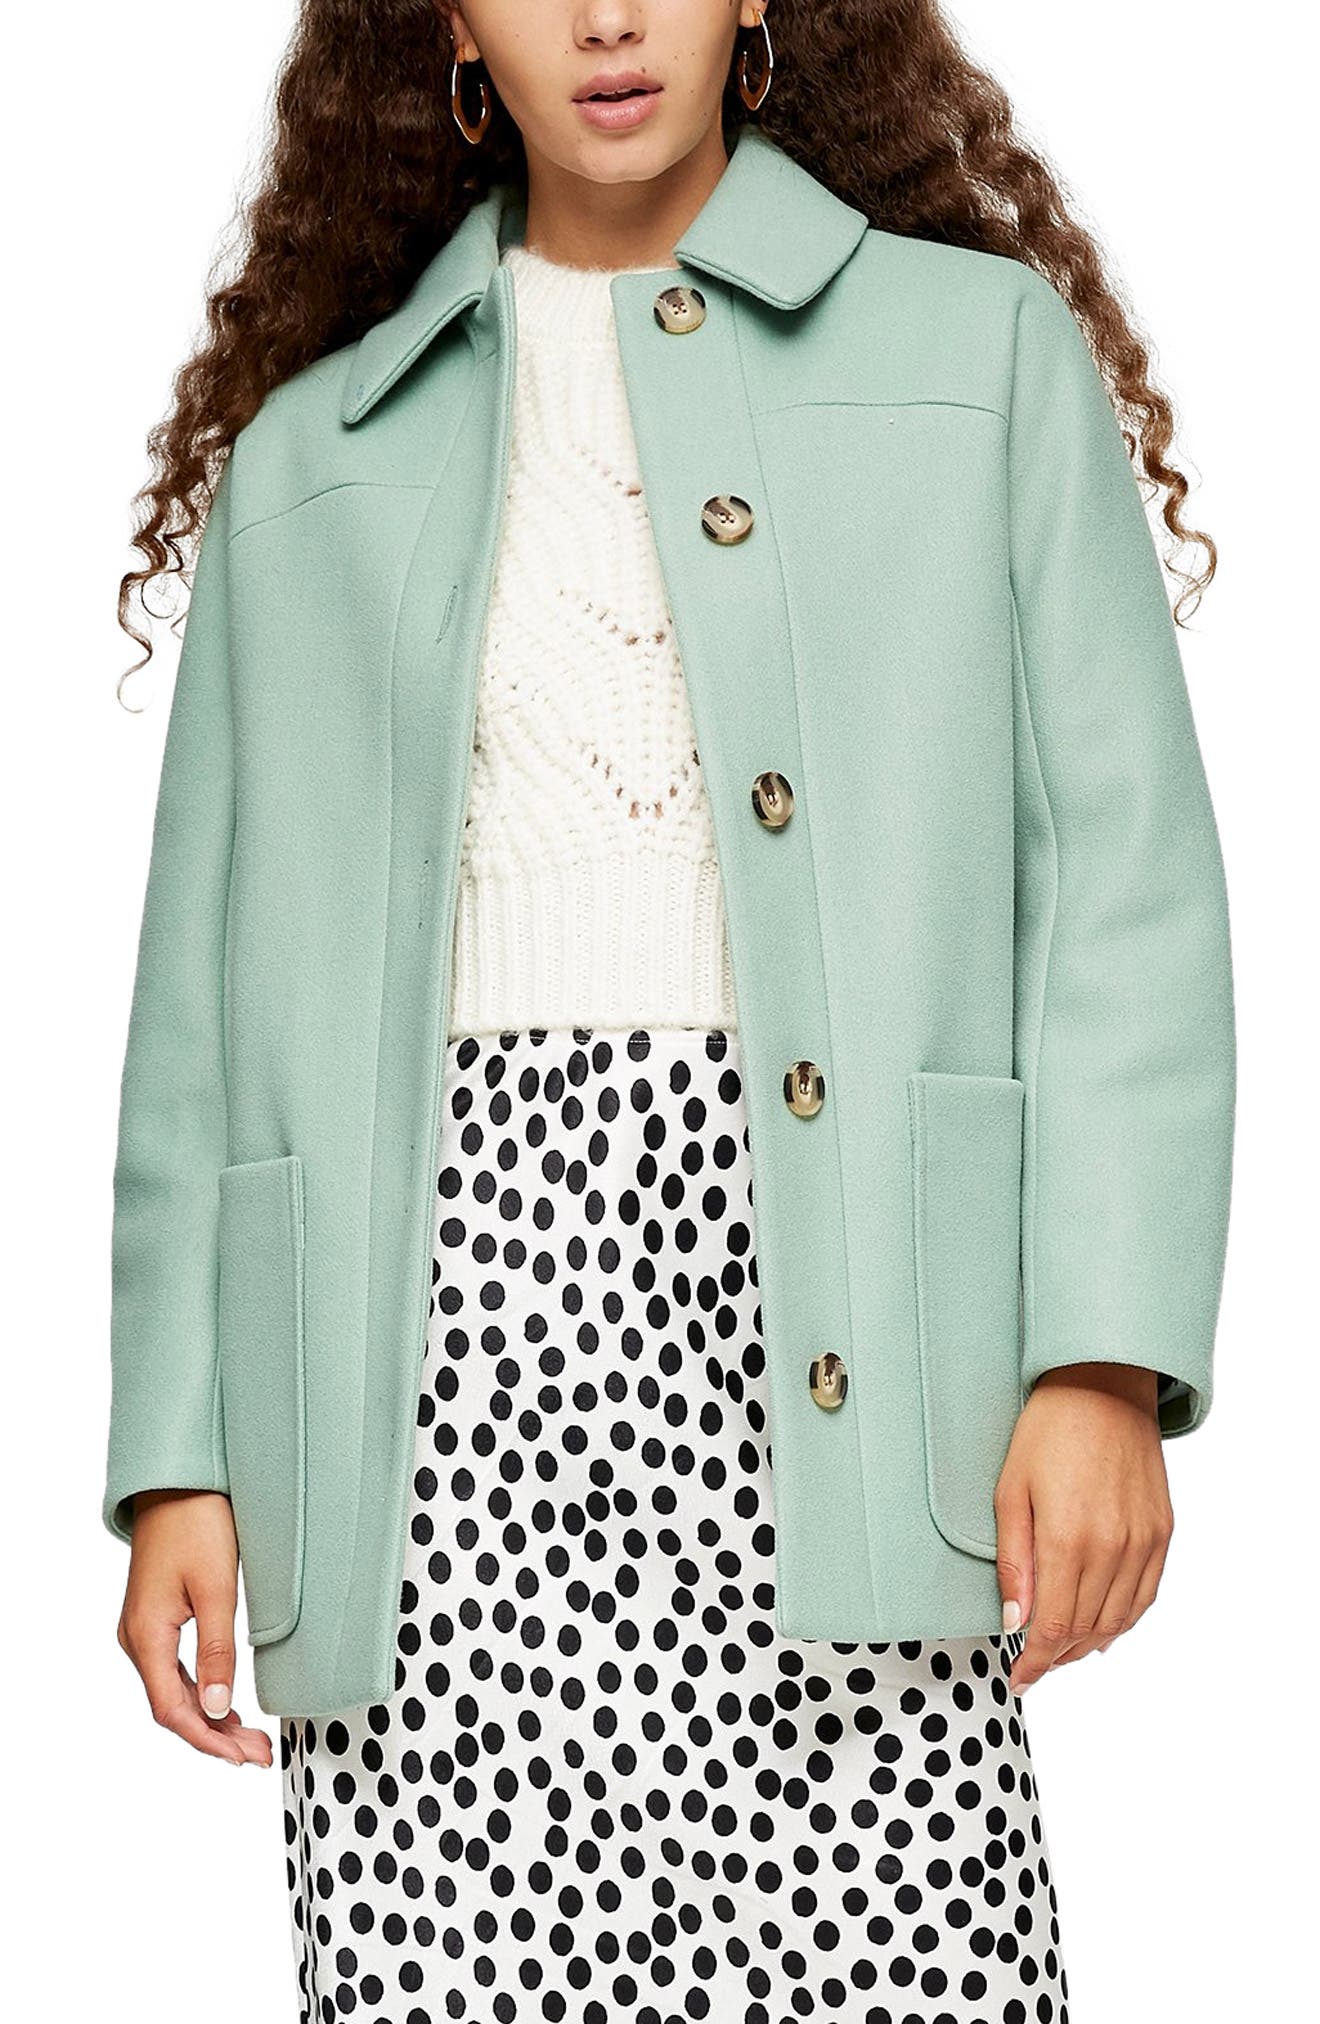 transitional weather coats and jackets